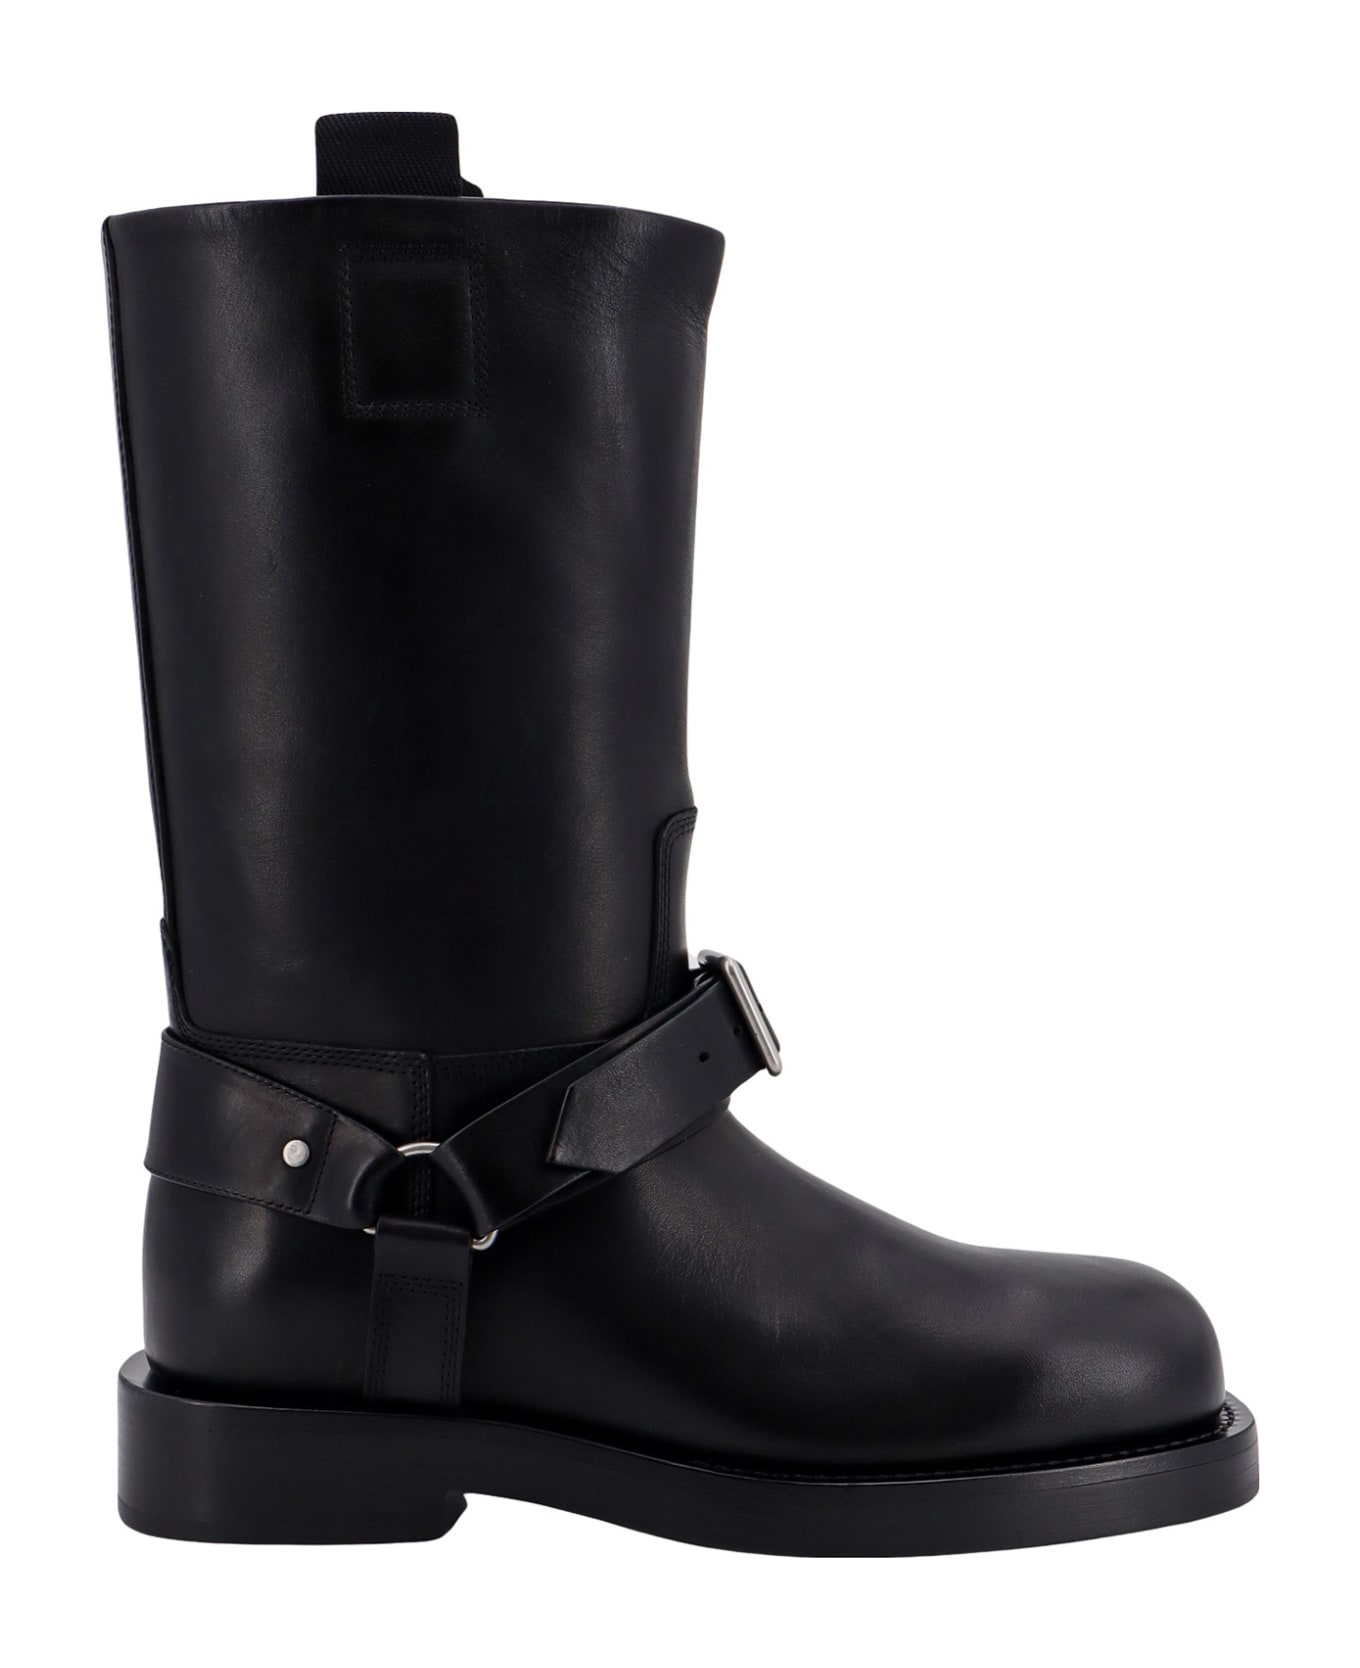 Burberry Saddle Low Boots - Black